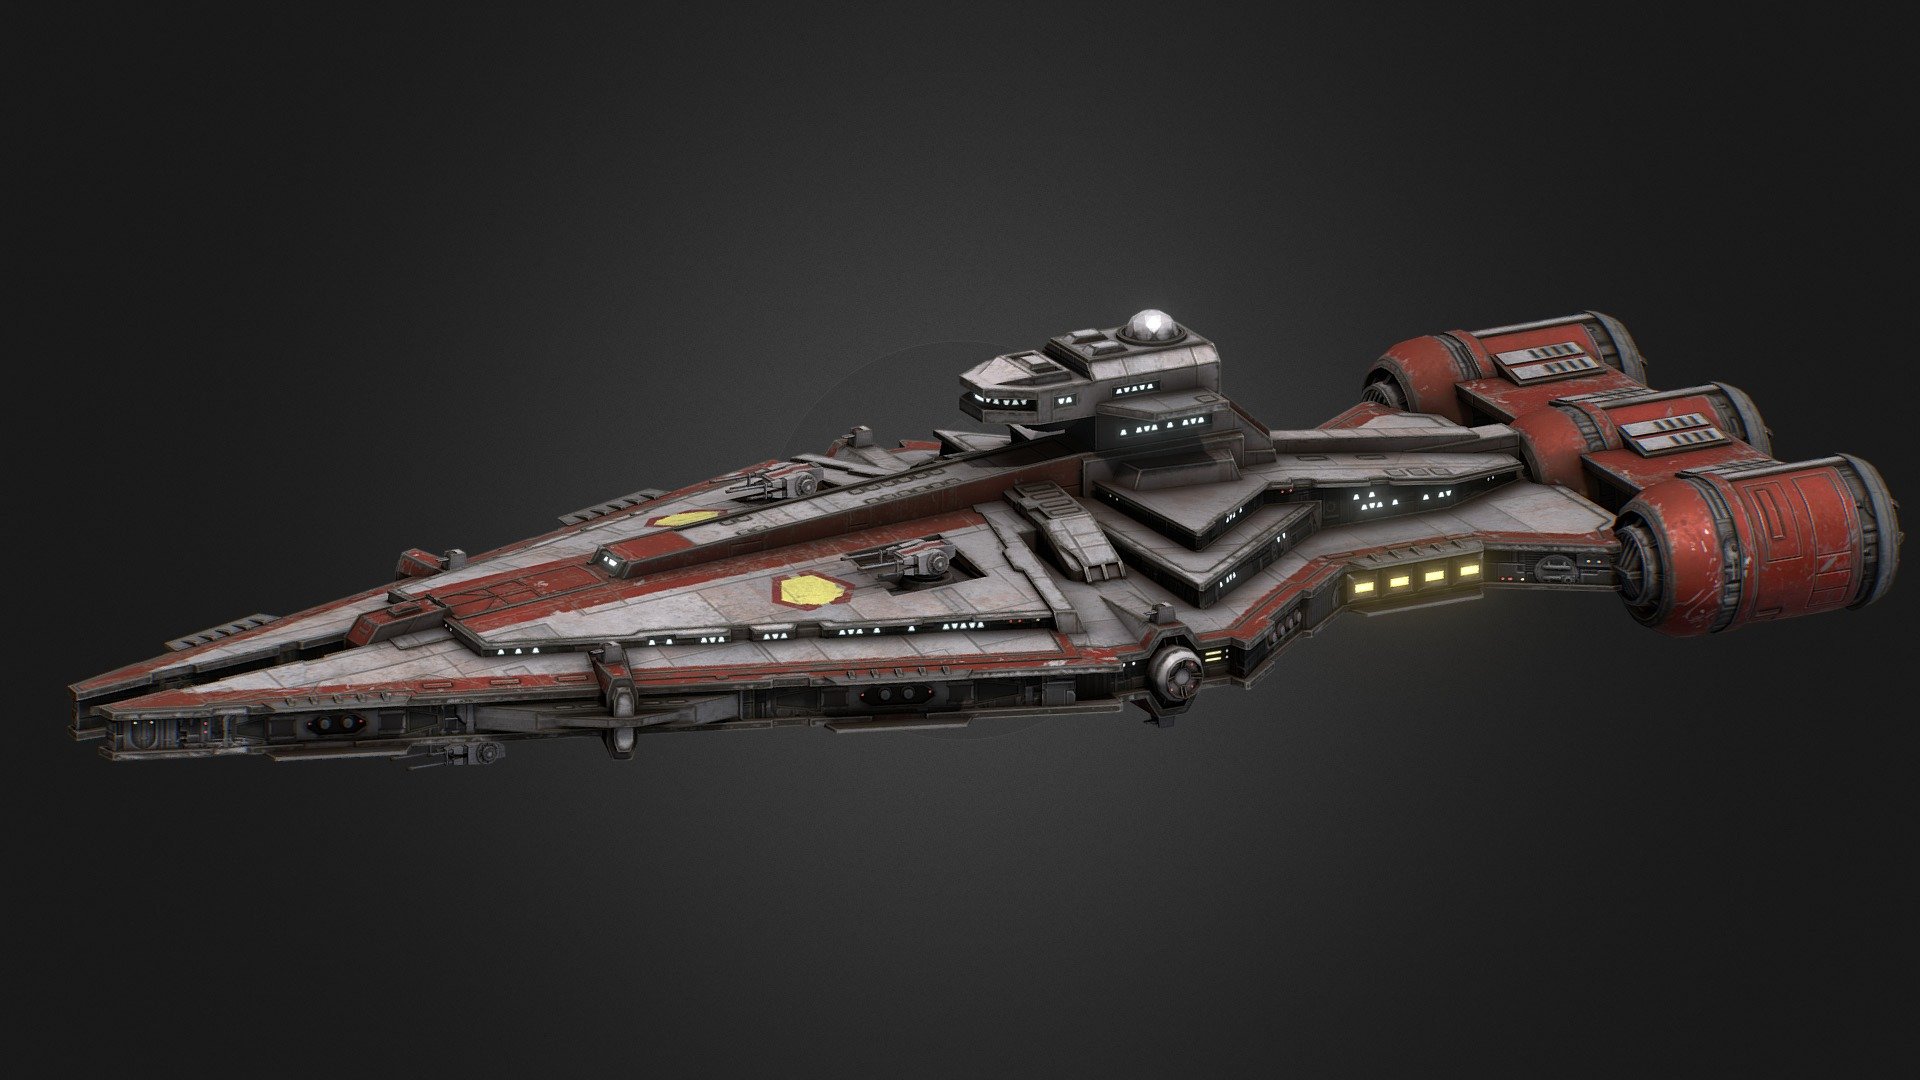 As the Clone Wars pushed into their fourth year, the Republic began to look back at existing ships in service and determine how best they could be preserved and improved to increase survivability and compatibility with other ships in the fleet. One such ship that underwent multiple improvements was the Arquitens-class Light Cruiser.

A new bridge module was installed using standardized Command and Control (C2) systems already in place on the Venator and Acclamator, the engines were brought up to current standards along with structural adjustments to allow for more efficient cooling, and the ship's weapons were rearranged and more escape pods installed for crew use in emergencies.

• Mesh &amp; design by ArvisTaljik, I did some greebles and the texture work.

• Join my Patreon for monthly game ready models! www.patreon.com/Kharak

• Check out my other content: linktr.ee/dominion_of_kharak - Republic Arquitens Frigate - Collab/Commission - 3D model by Kharak 3d model